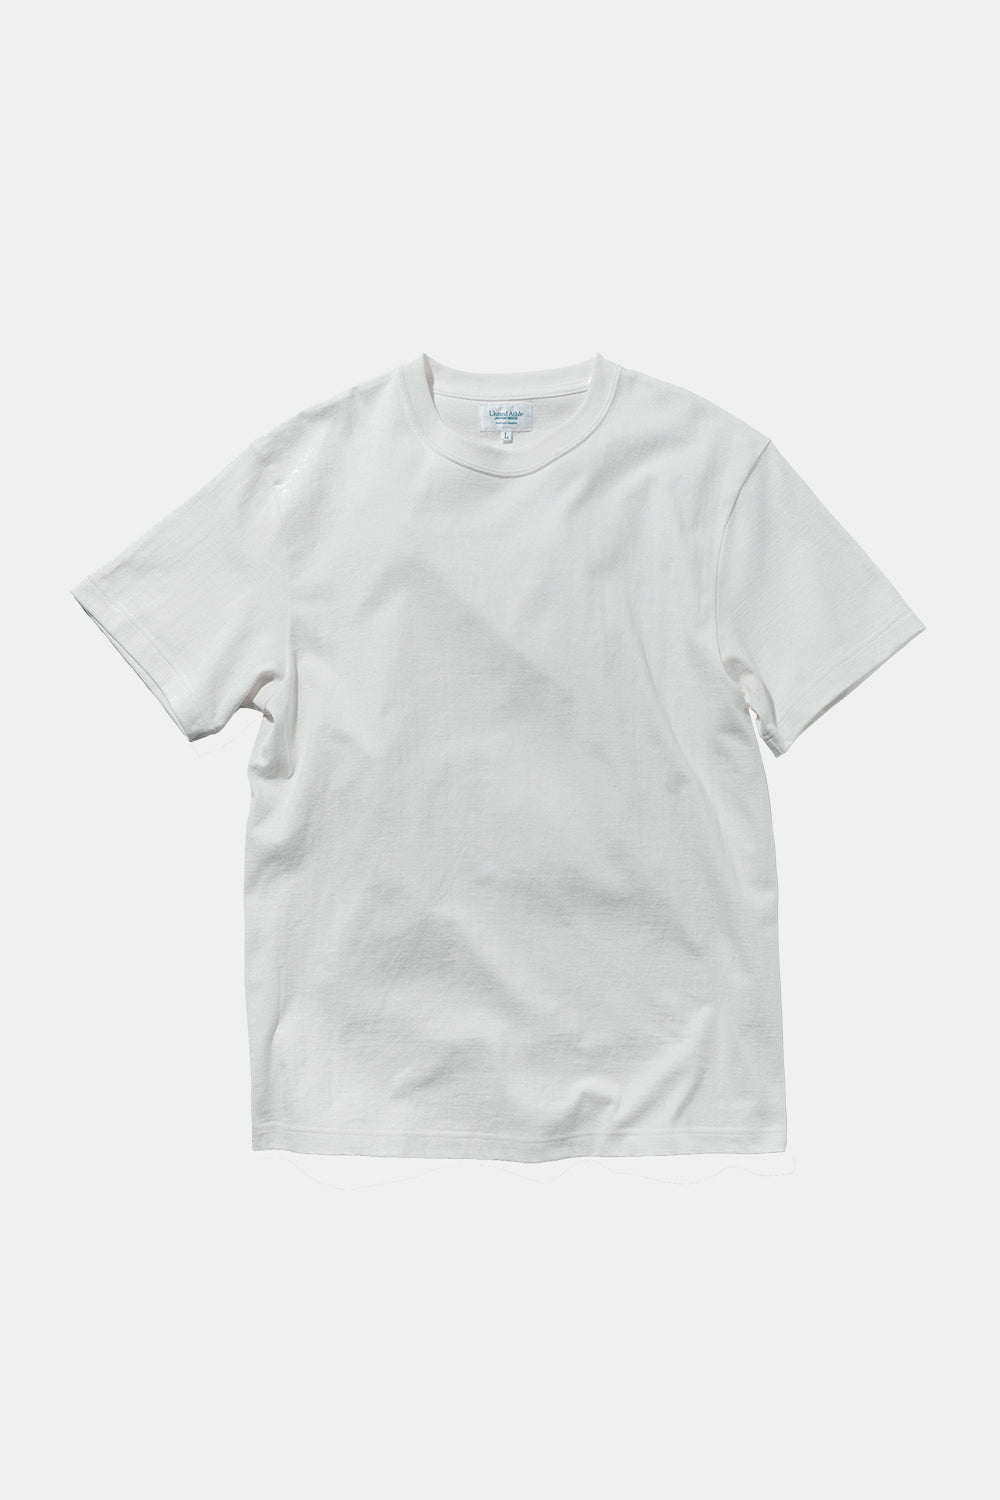 United Athle Japan Made Wide Fit T-shirt (White)